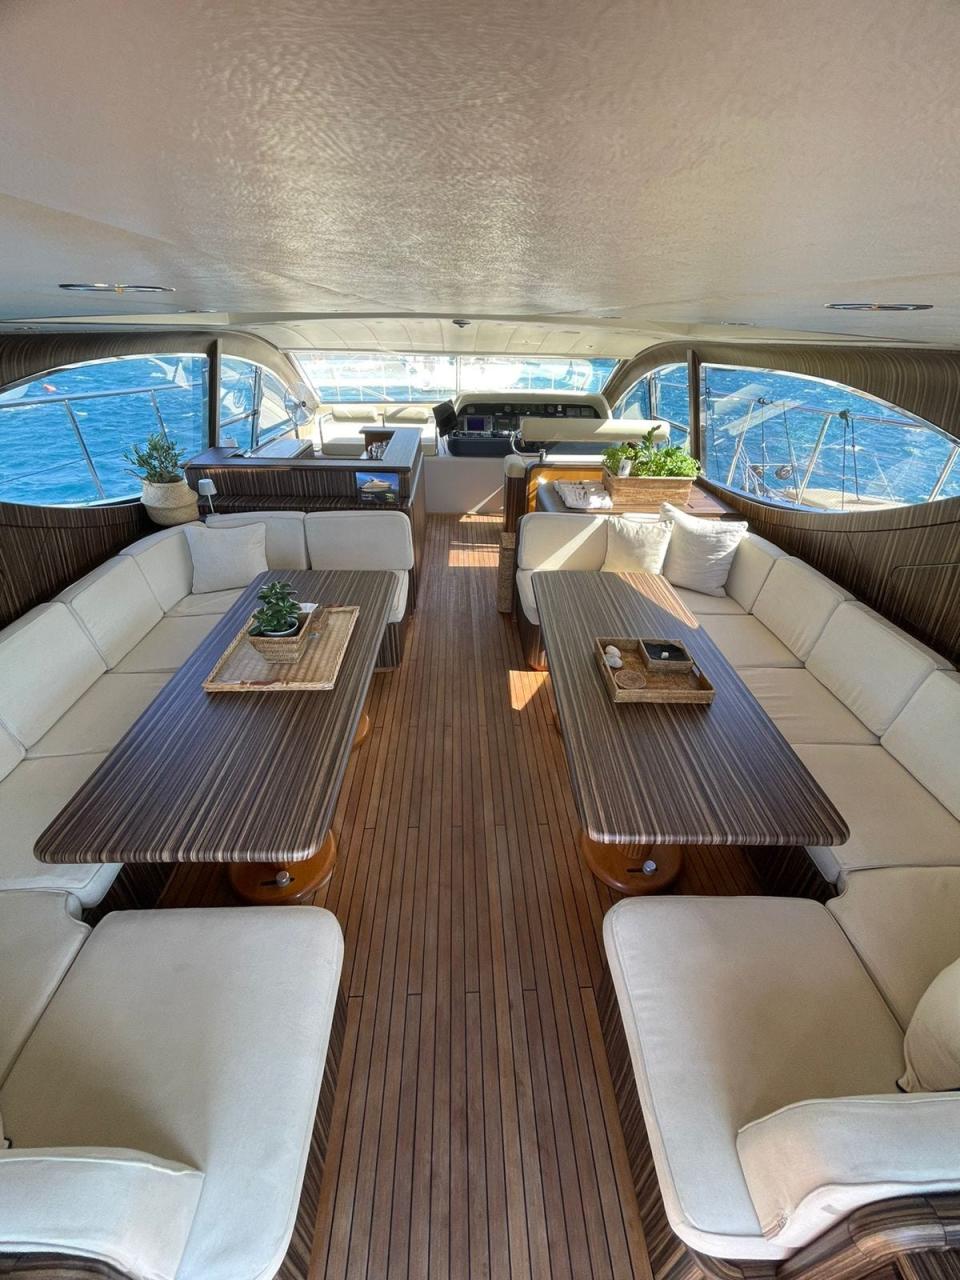 Interior view of Zeus yacht with two dining tables and two booths